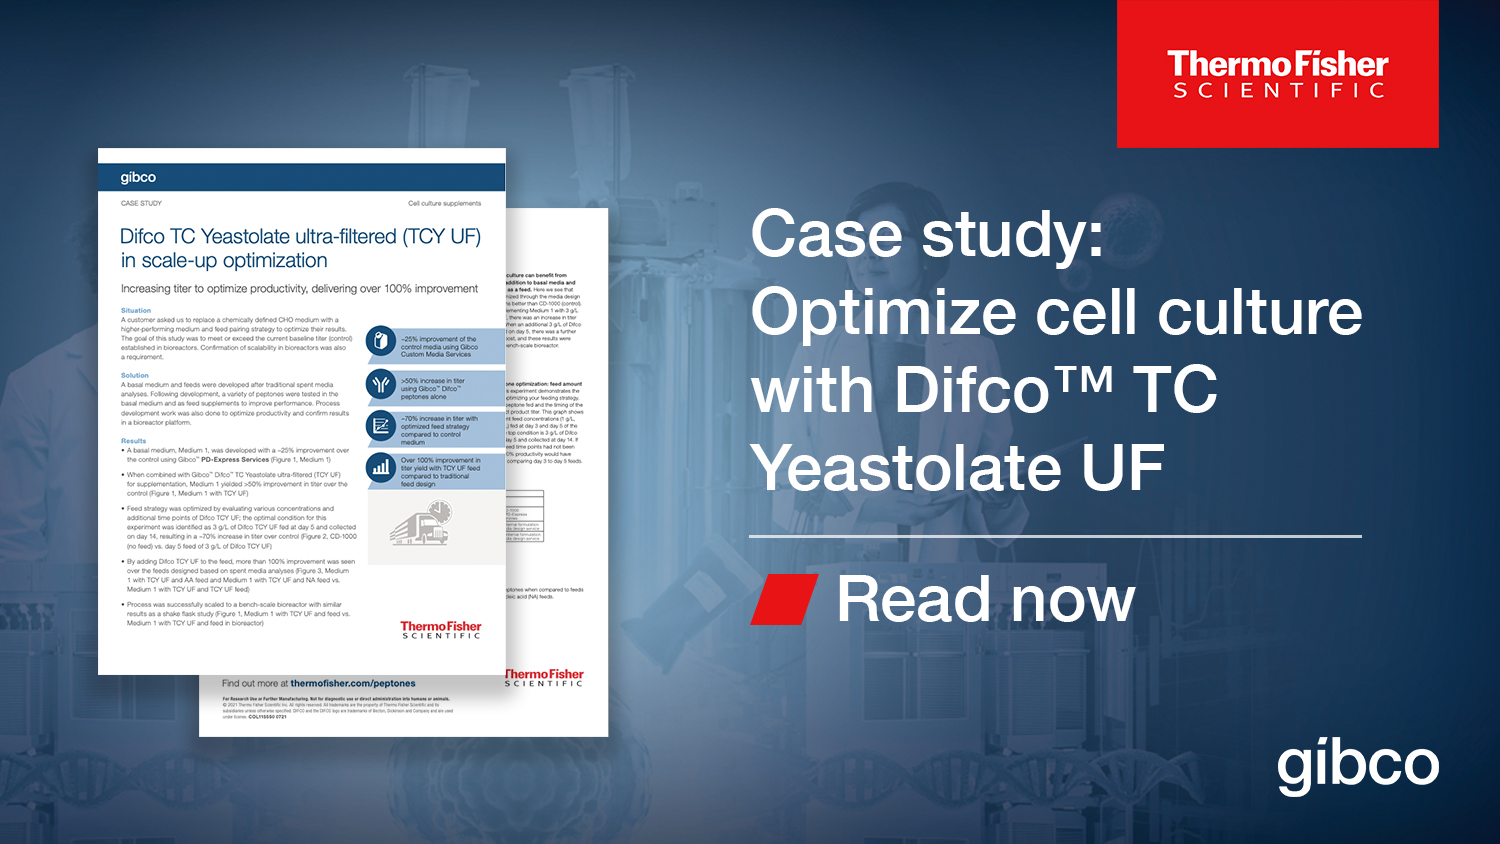 Difco TC Yeastolate UF in scale-up optimization